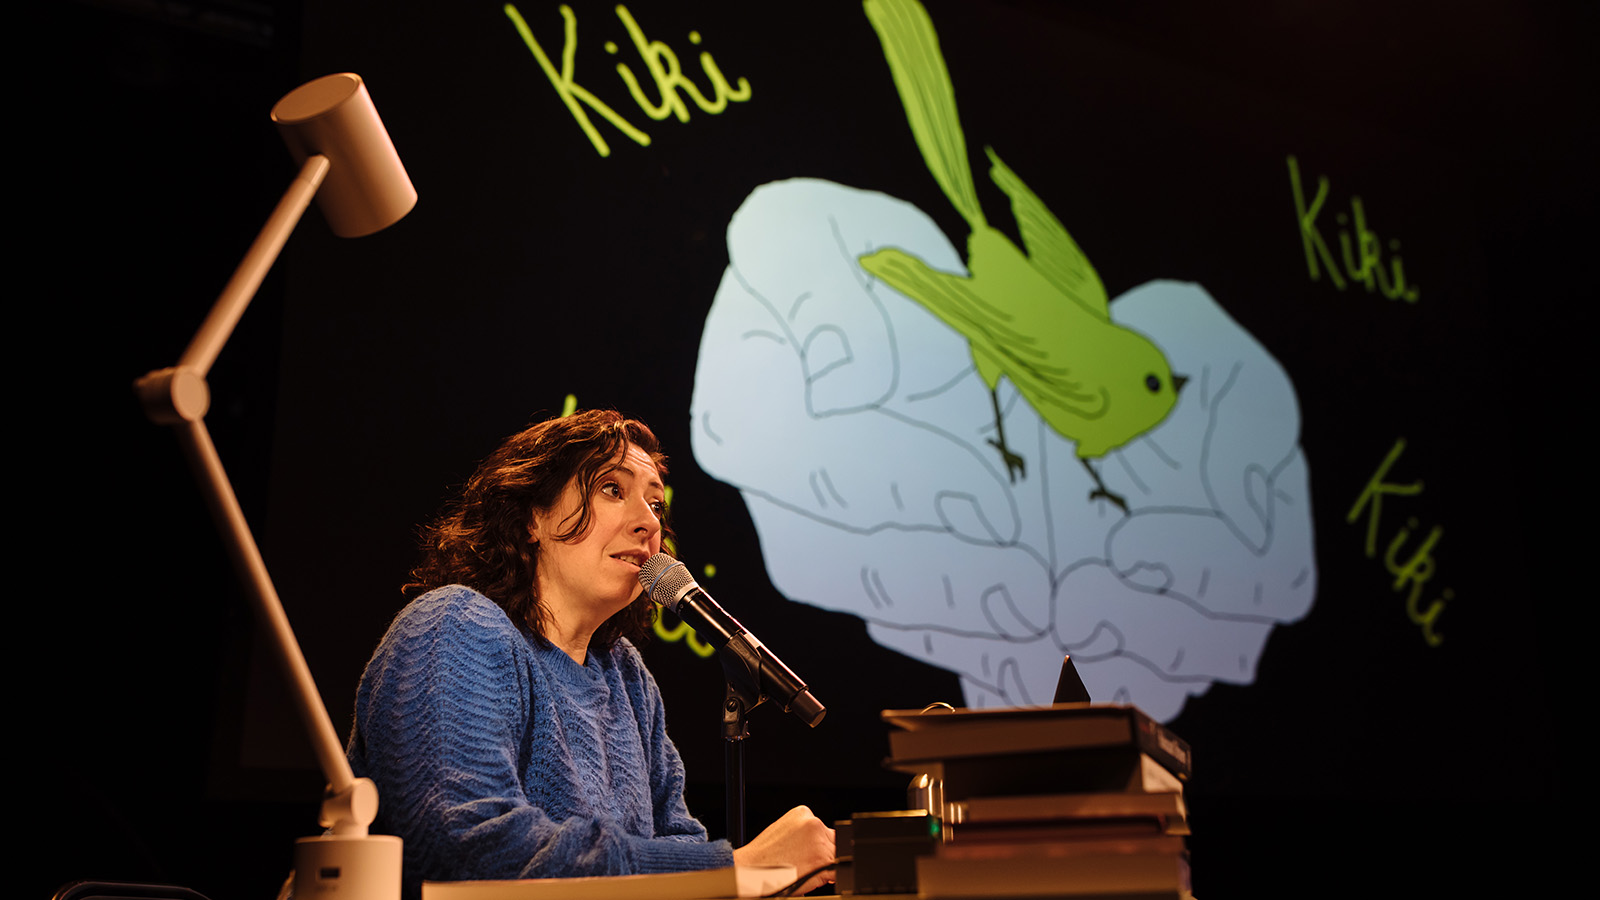 A woman with dark hair speaks into a microphone while she sits at a desk on stage with a spotlight on her. The rest of the stage is in darkness, other than a projection onto the wall behind her to the left, which shows an illustration of a bird in someone's hands